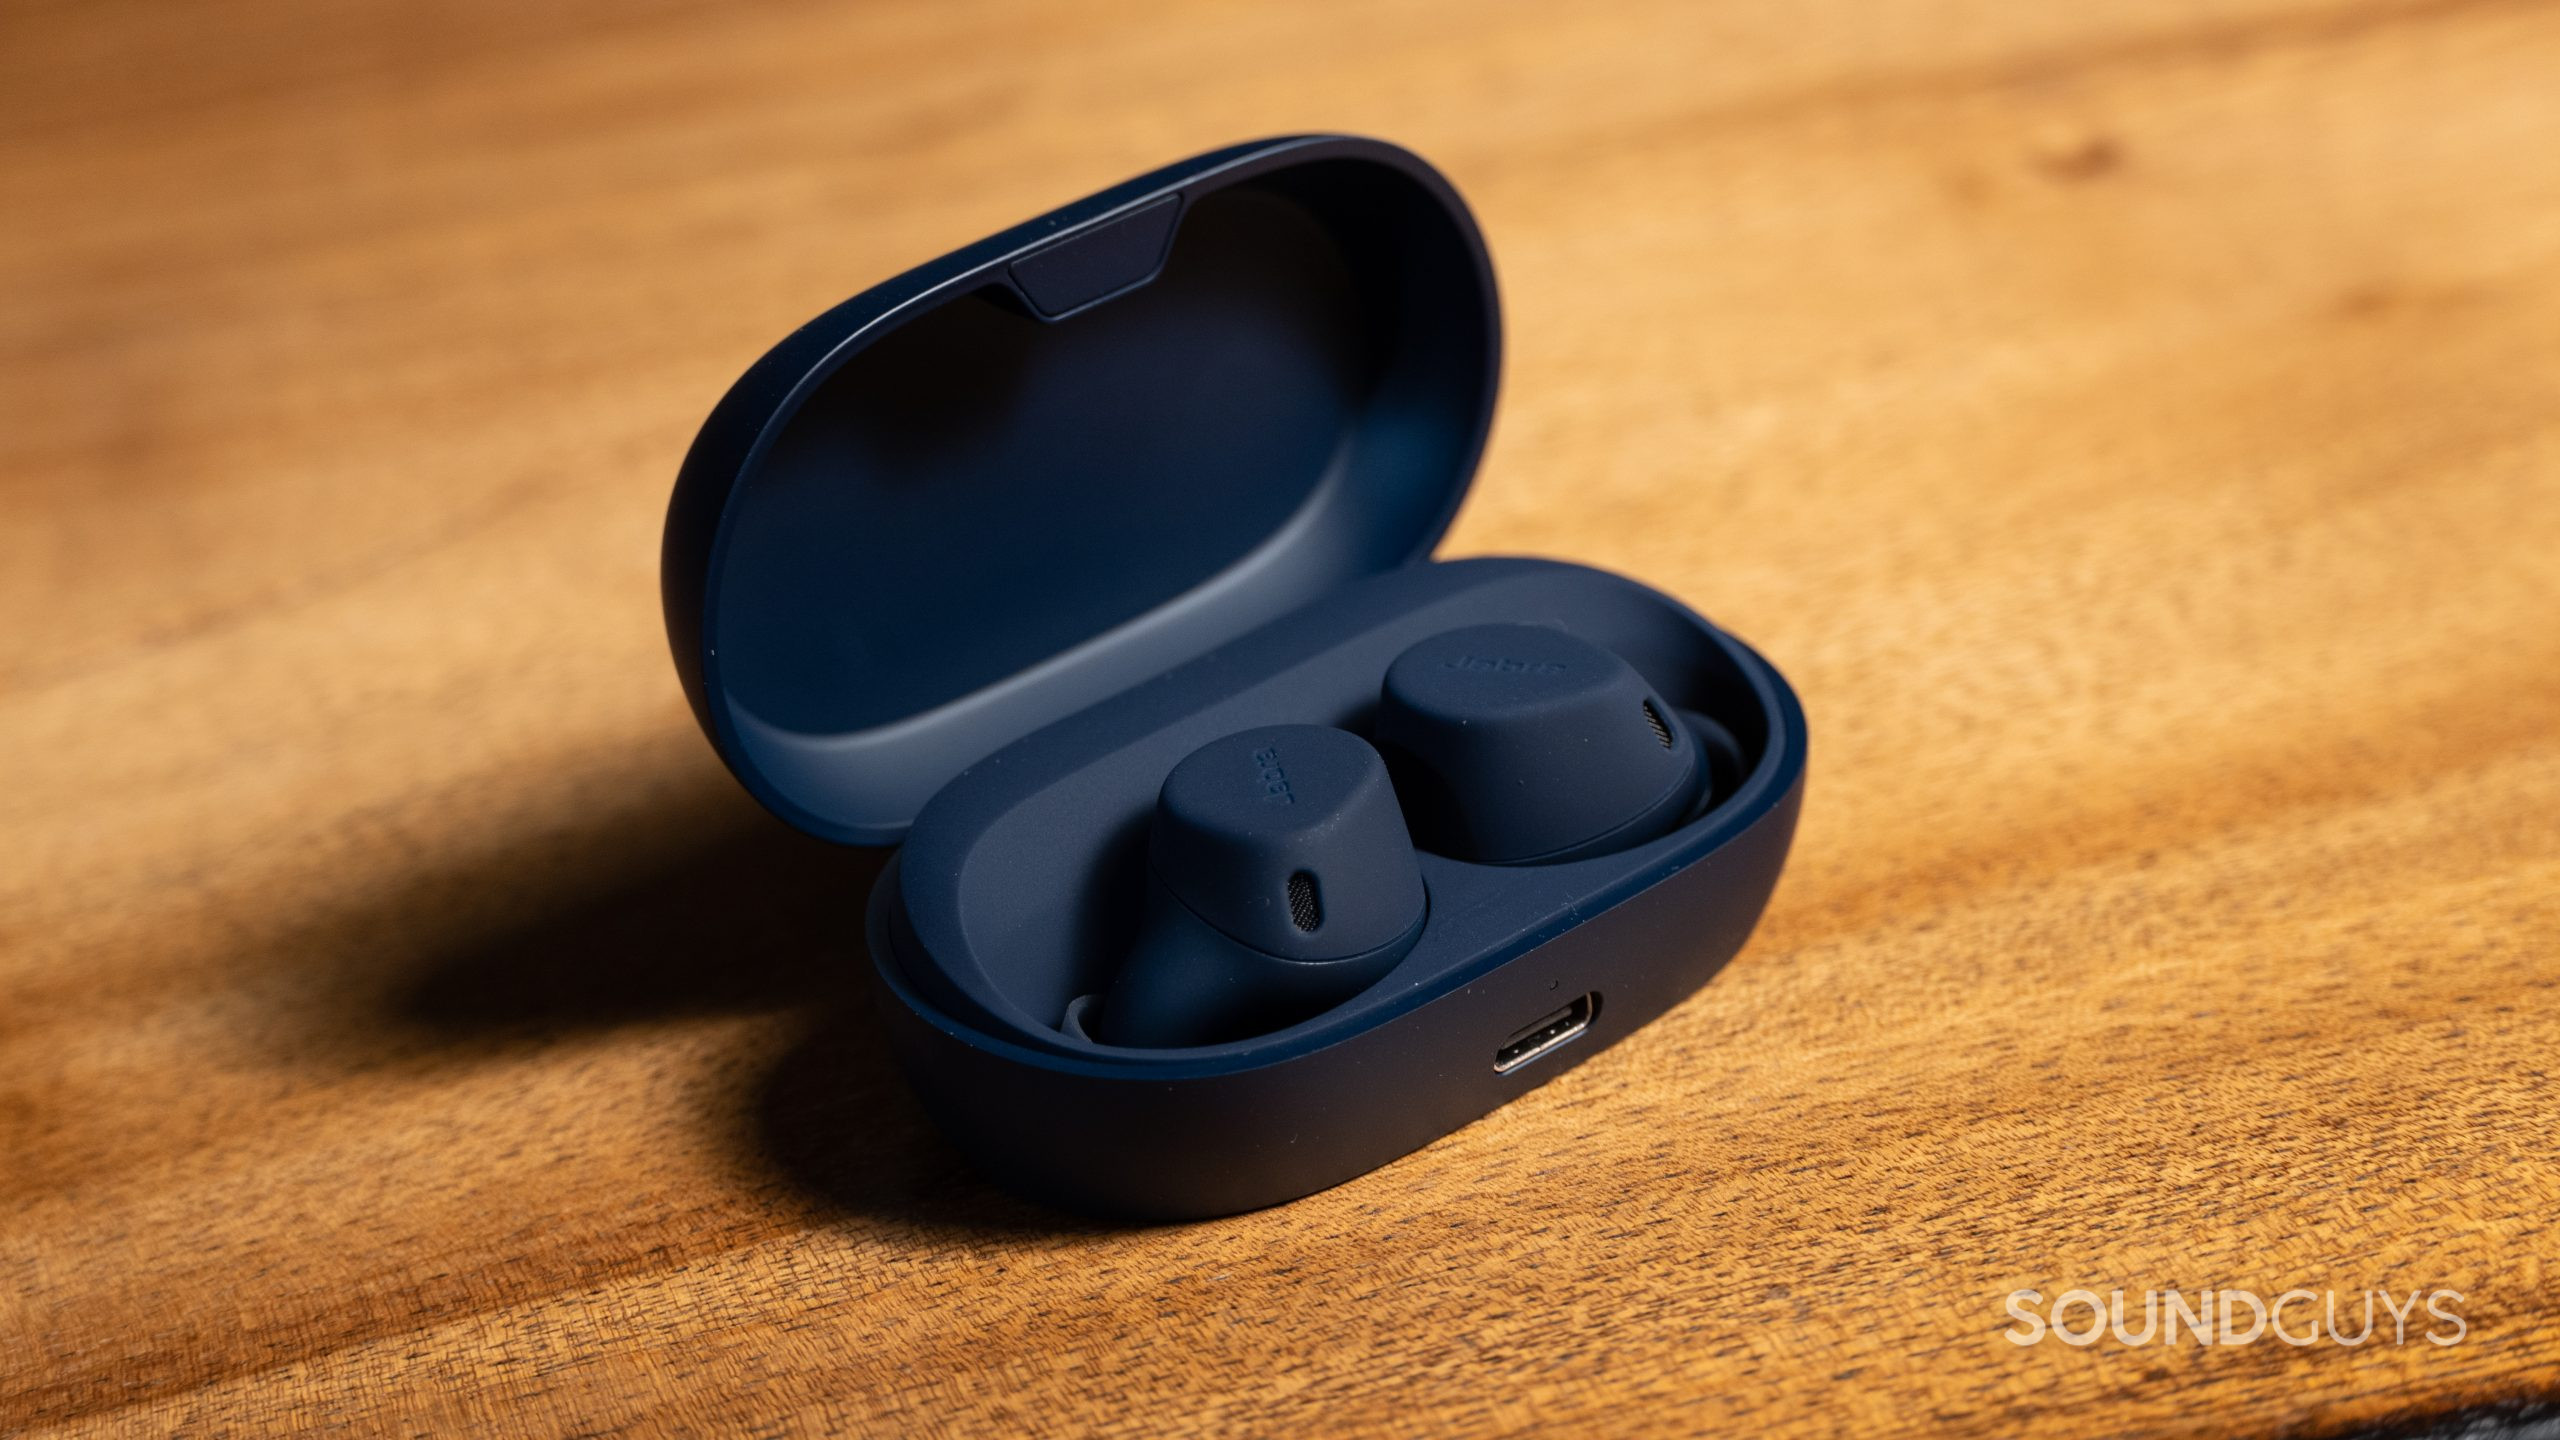 Jabra Elite 7 Active Review: Outstanding Workout Earbuds that Work Great  Even When Not Working Out - Serious Insights